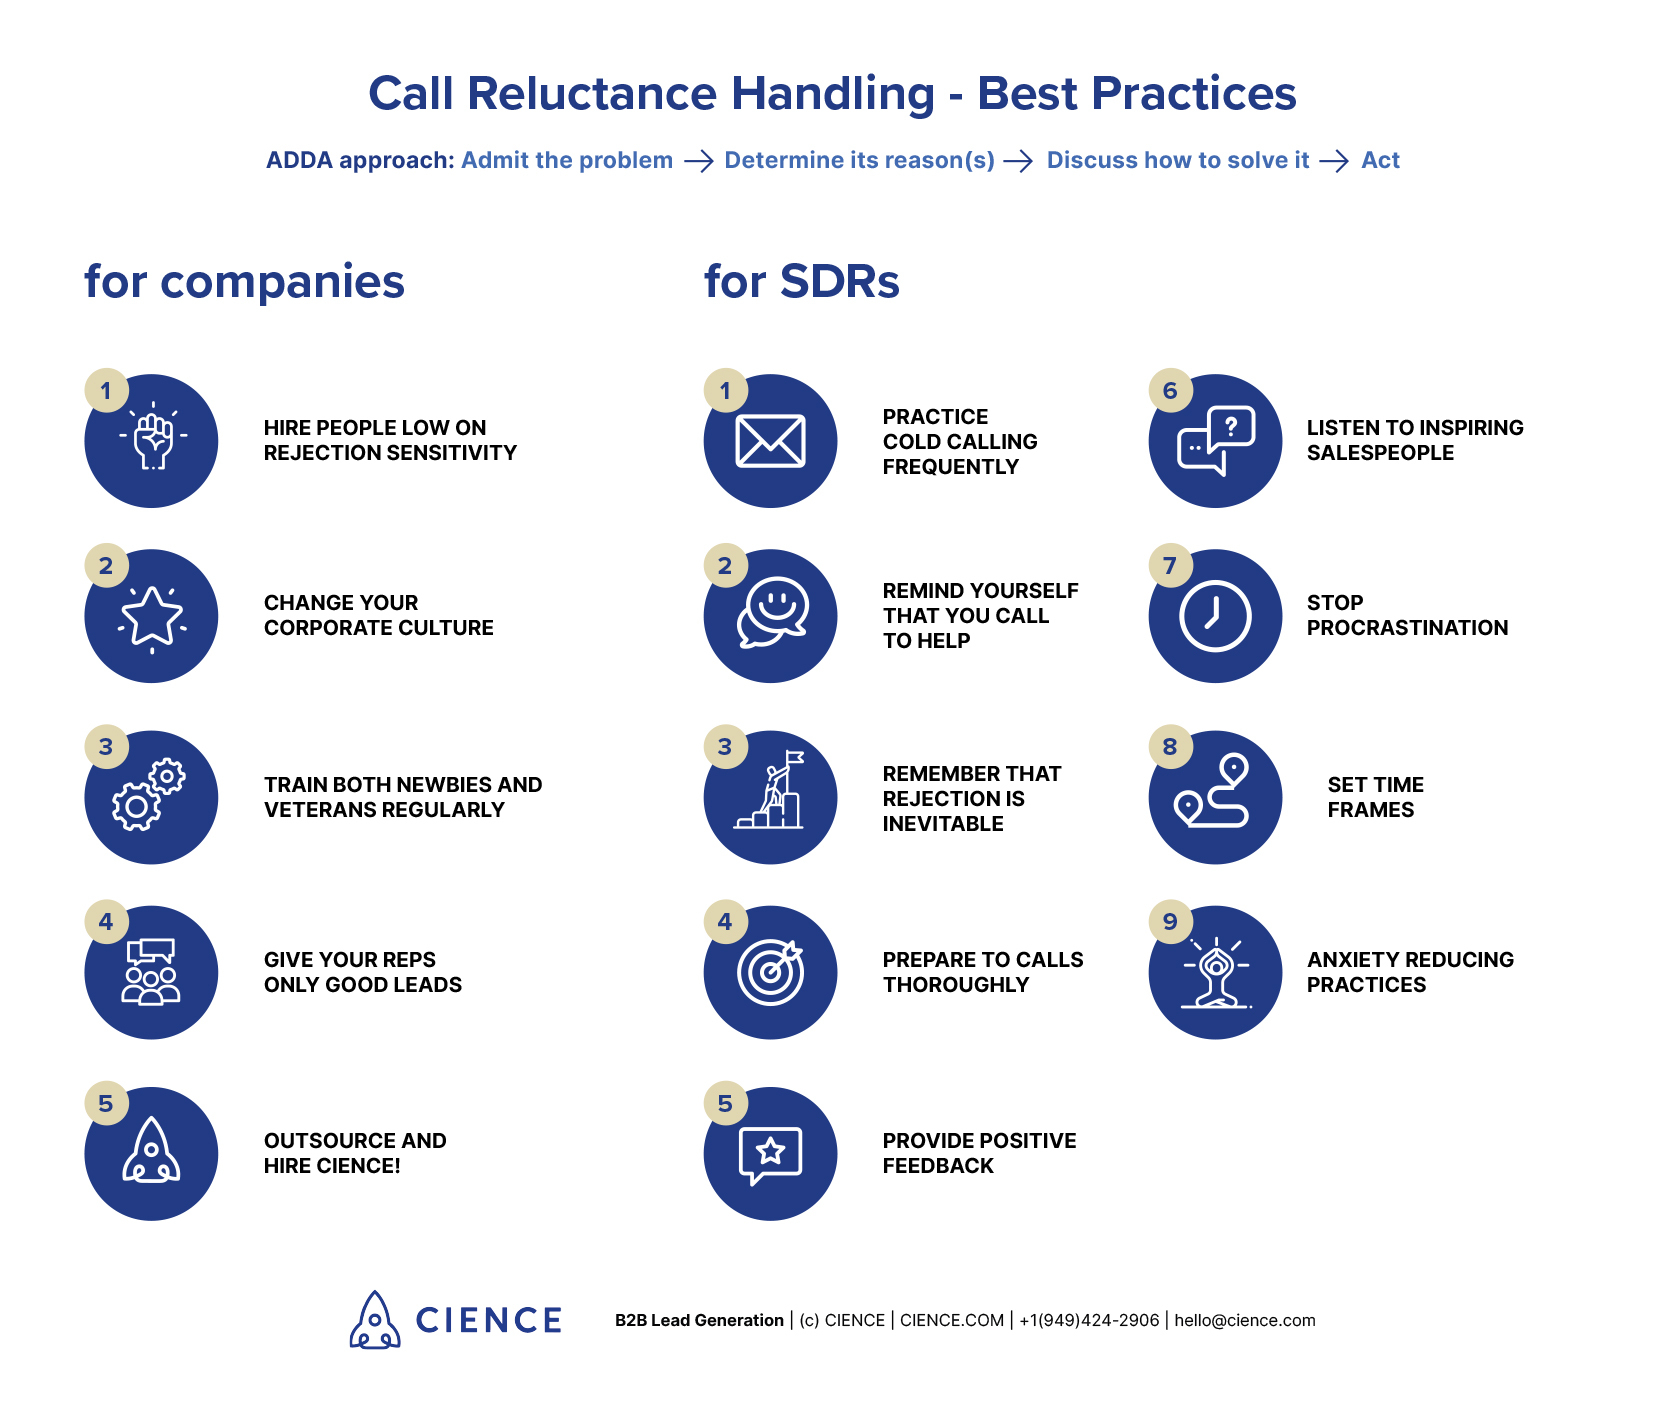 Call Reluctance handling best practices for  salesmen, SDRs and their managers